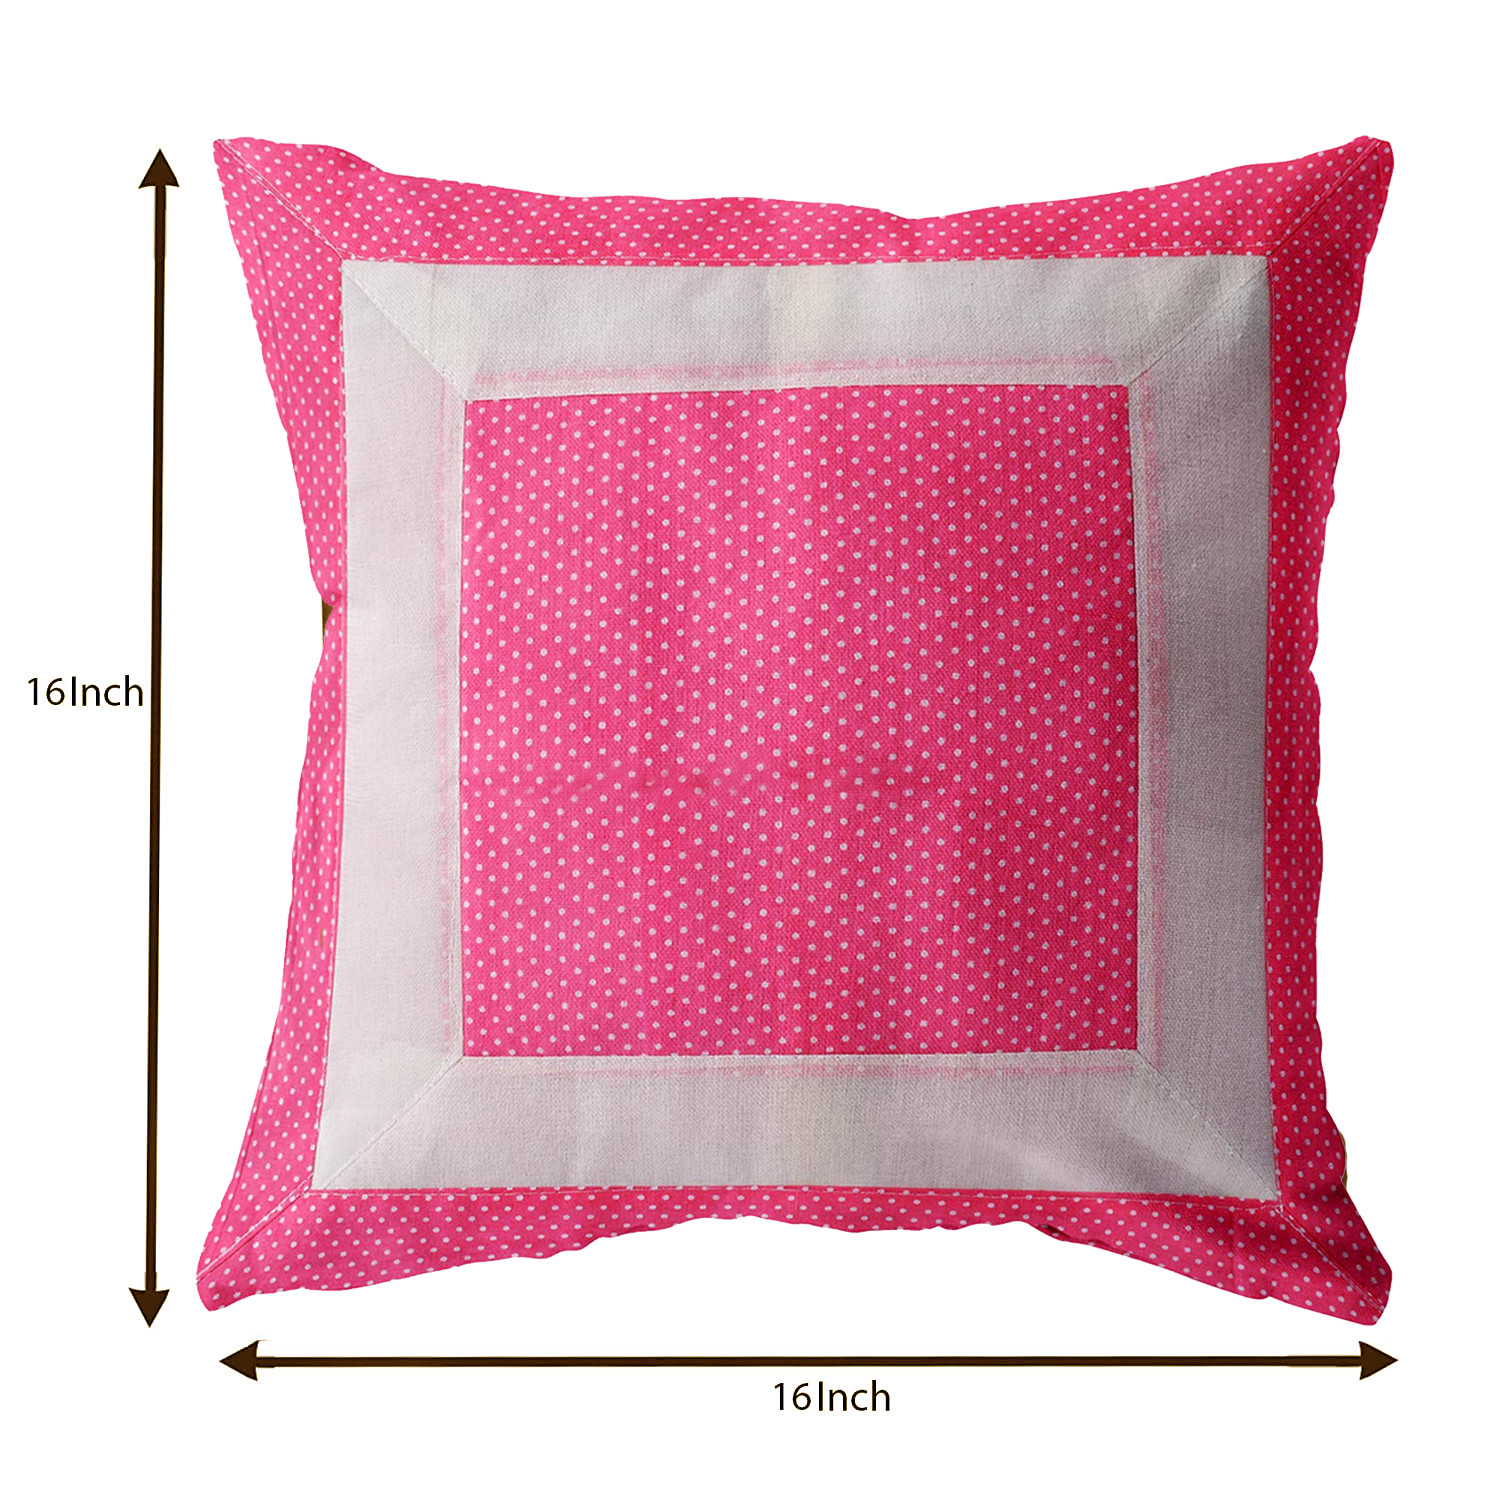 Kuber Industries Dot Printed Cotton Comfortable Decorative Throw Pillow Case Square Cushion Cover Pillowcas 16x16 Inches,(Pink)